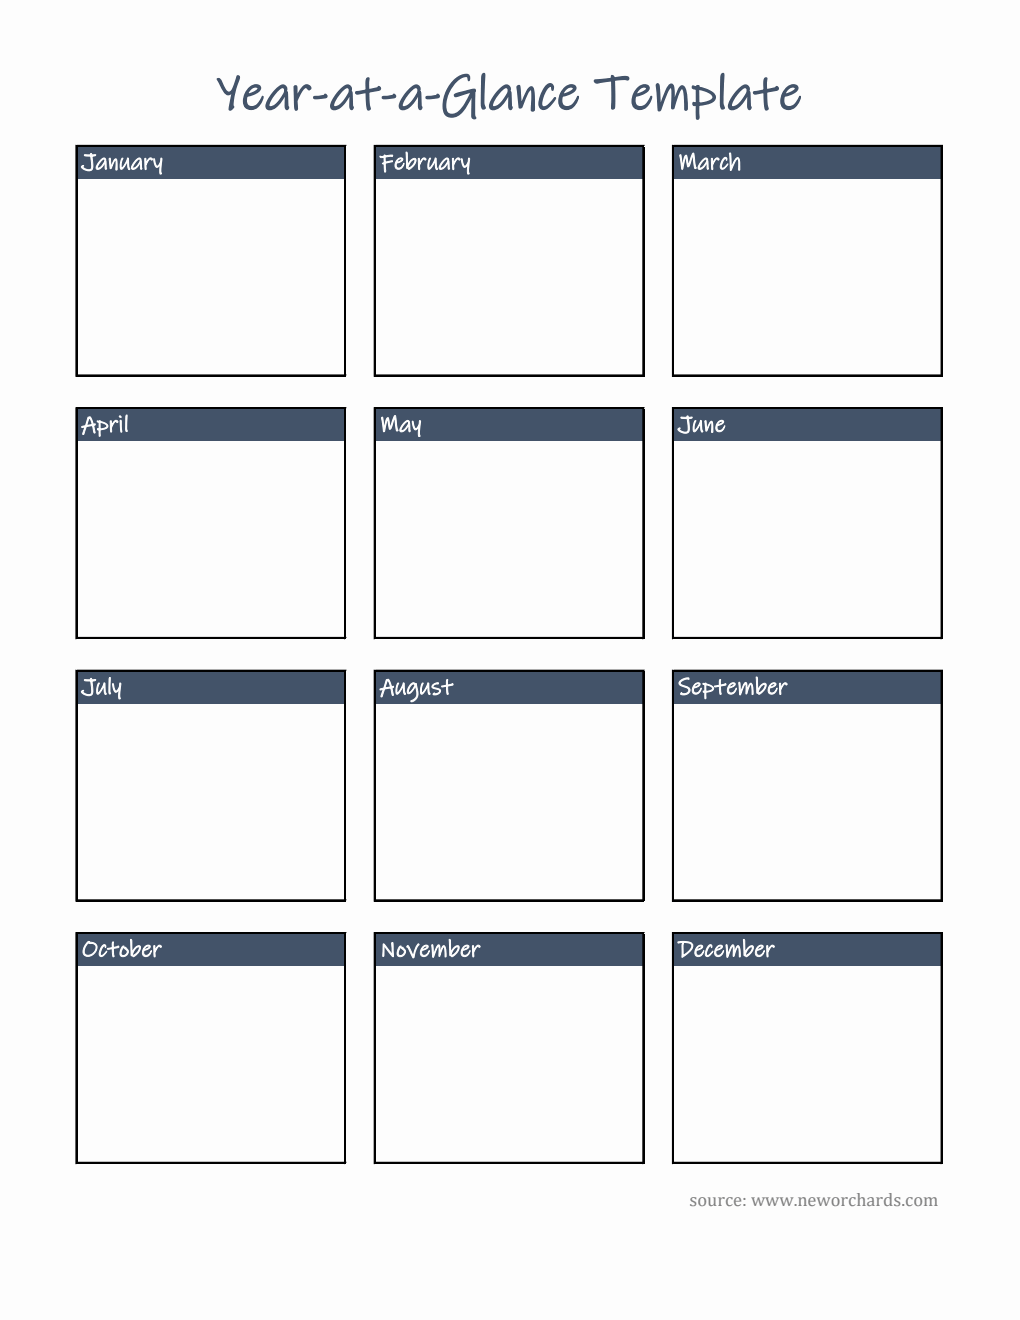 Blank Year at a Glance Template in Excel